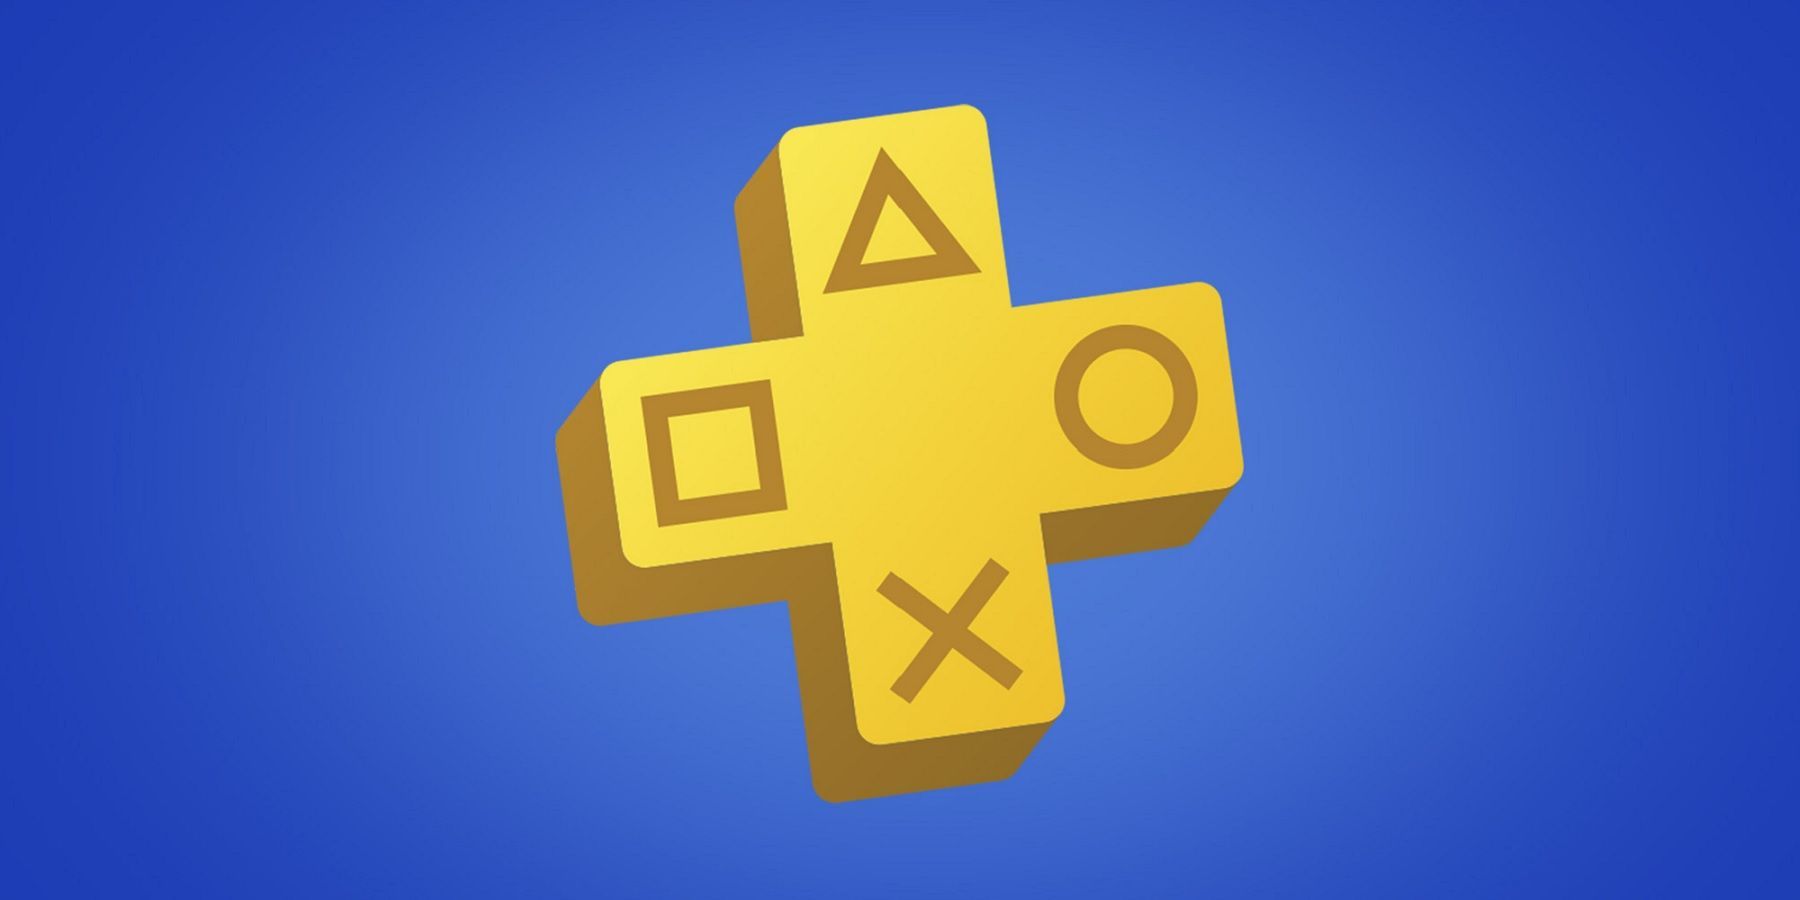 Last Chance To Play: 10 PS Plus Extra Games Being Removed In April 2023 –